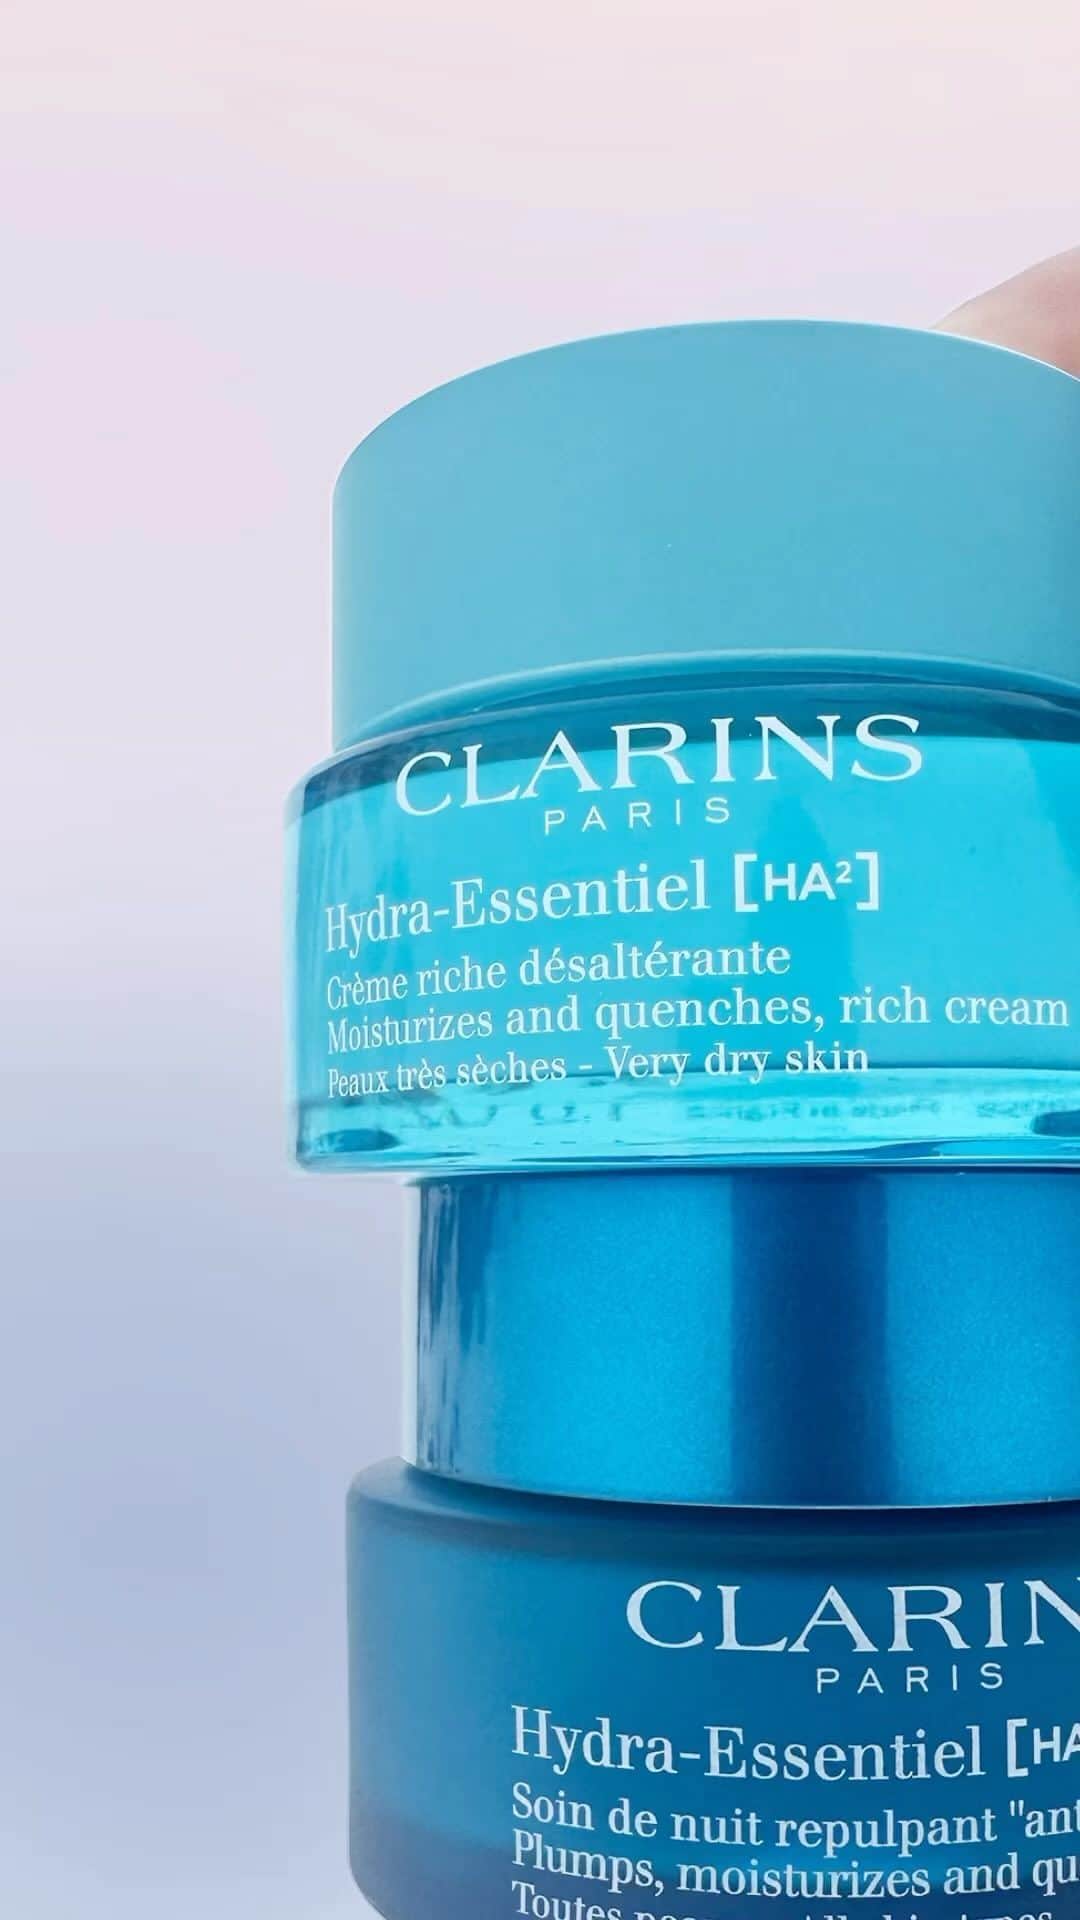 ClarinsUKのインスタグラム：「Get ready to feel your skin looking more plump and radiant than ever…Feel the difference in just 60 seconds!  🩵 DAY 🩵Hydra -Essential [HA2] Silky Cream. Enriched with Clarins’ exclusive Hyaluronic Power Complex for protection against external aggressors, and is a natural moisturiser.  💙 NIGHT 💙Hydra -Essential [HA2] Night Cream. Enriched with Clarins’ exclusive Hyaluronic Power Complex and Squalane to compensate for water loss during the night.  Drop us an 🩵 if you use the Hydra Essential [HA2] range   #Clarins #Skincare #HydraEssential #Hydration」